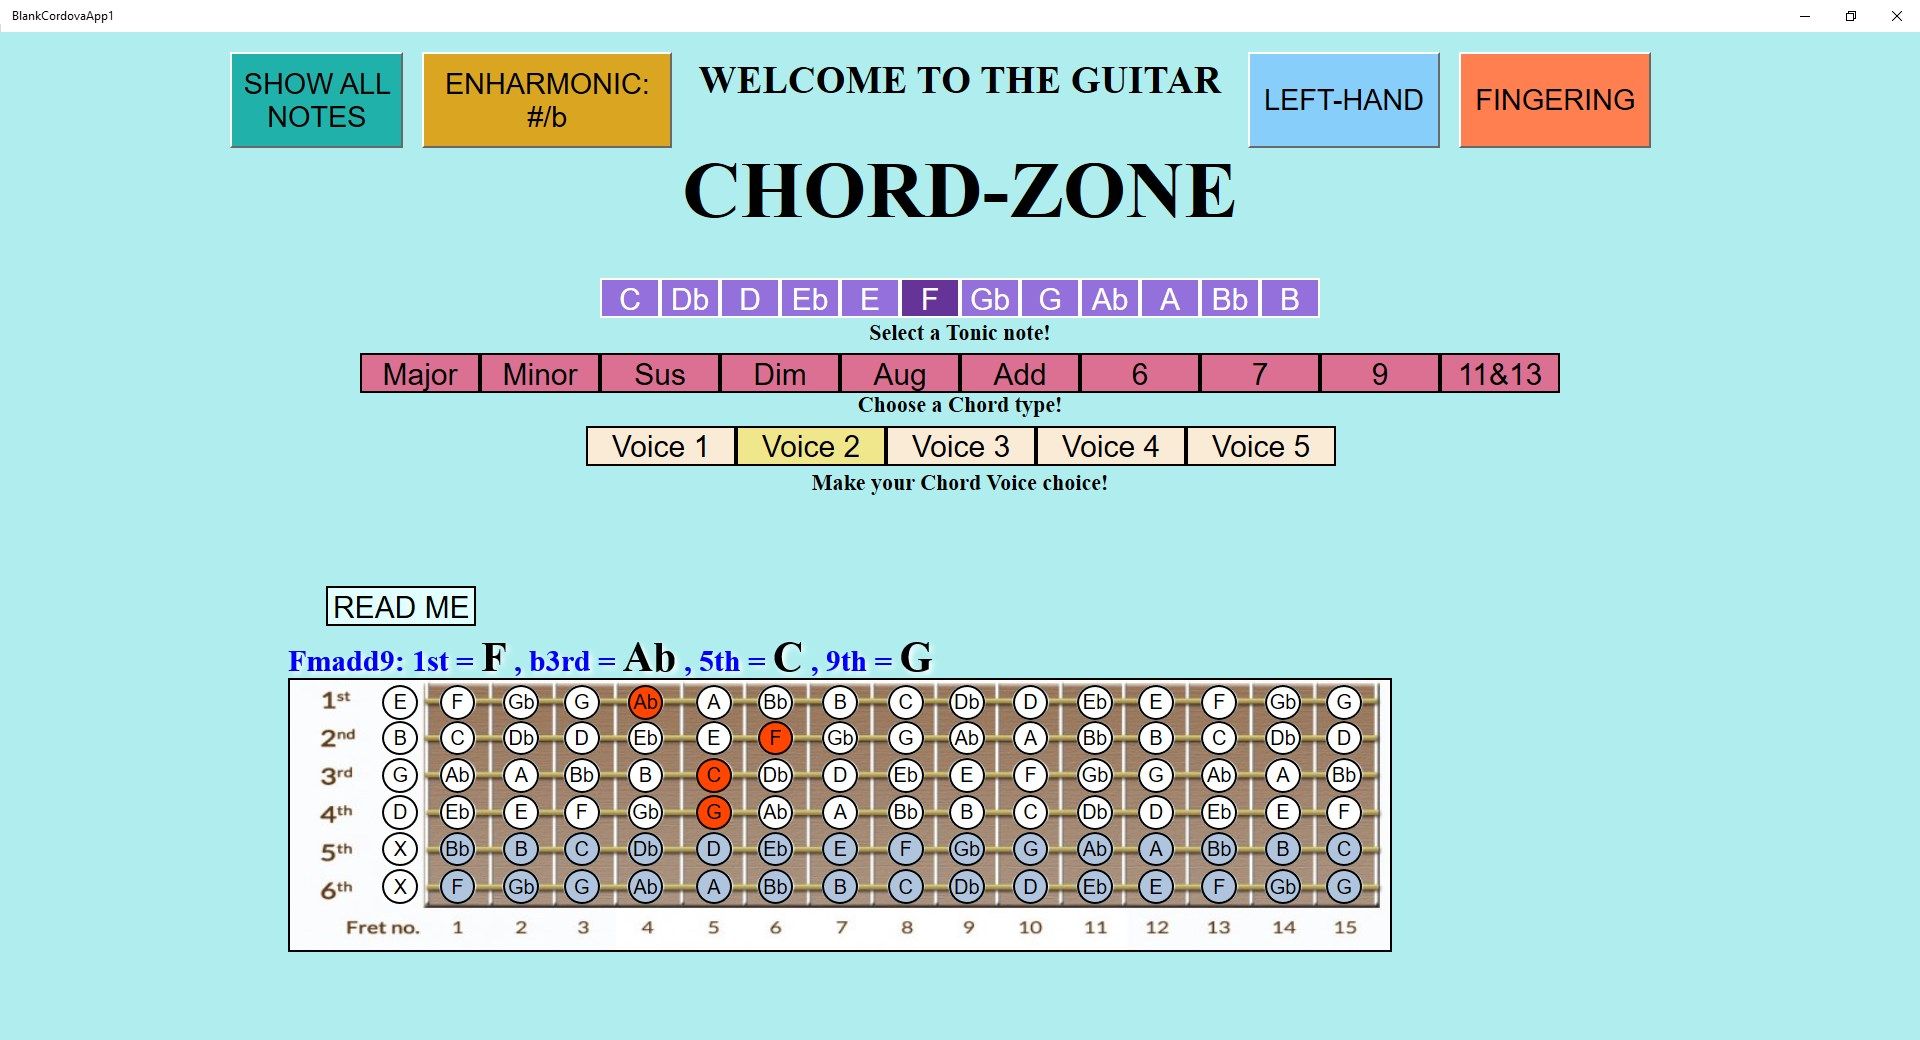 This shows an F minor add 9 chord, voice 2, on the right hand fretboard with the enharmonic set to flats.